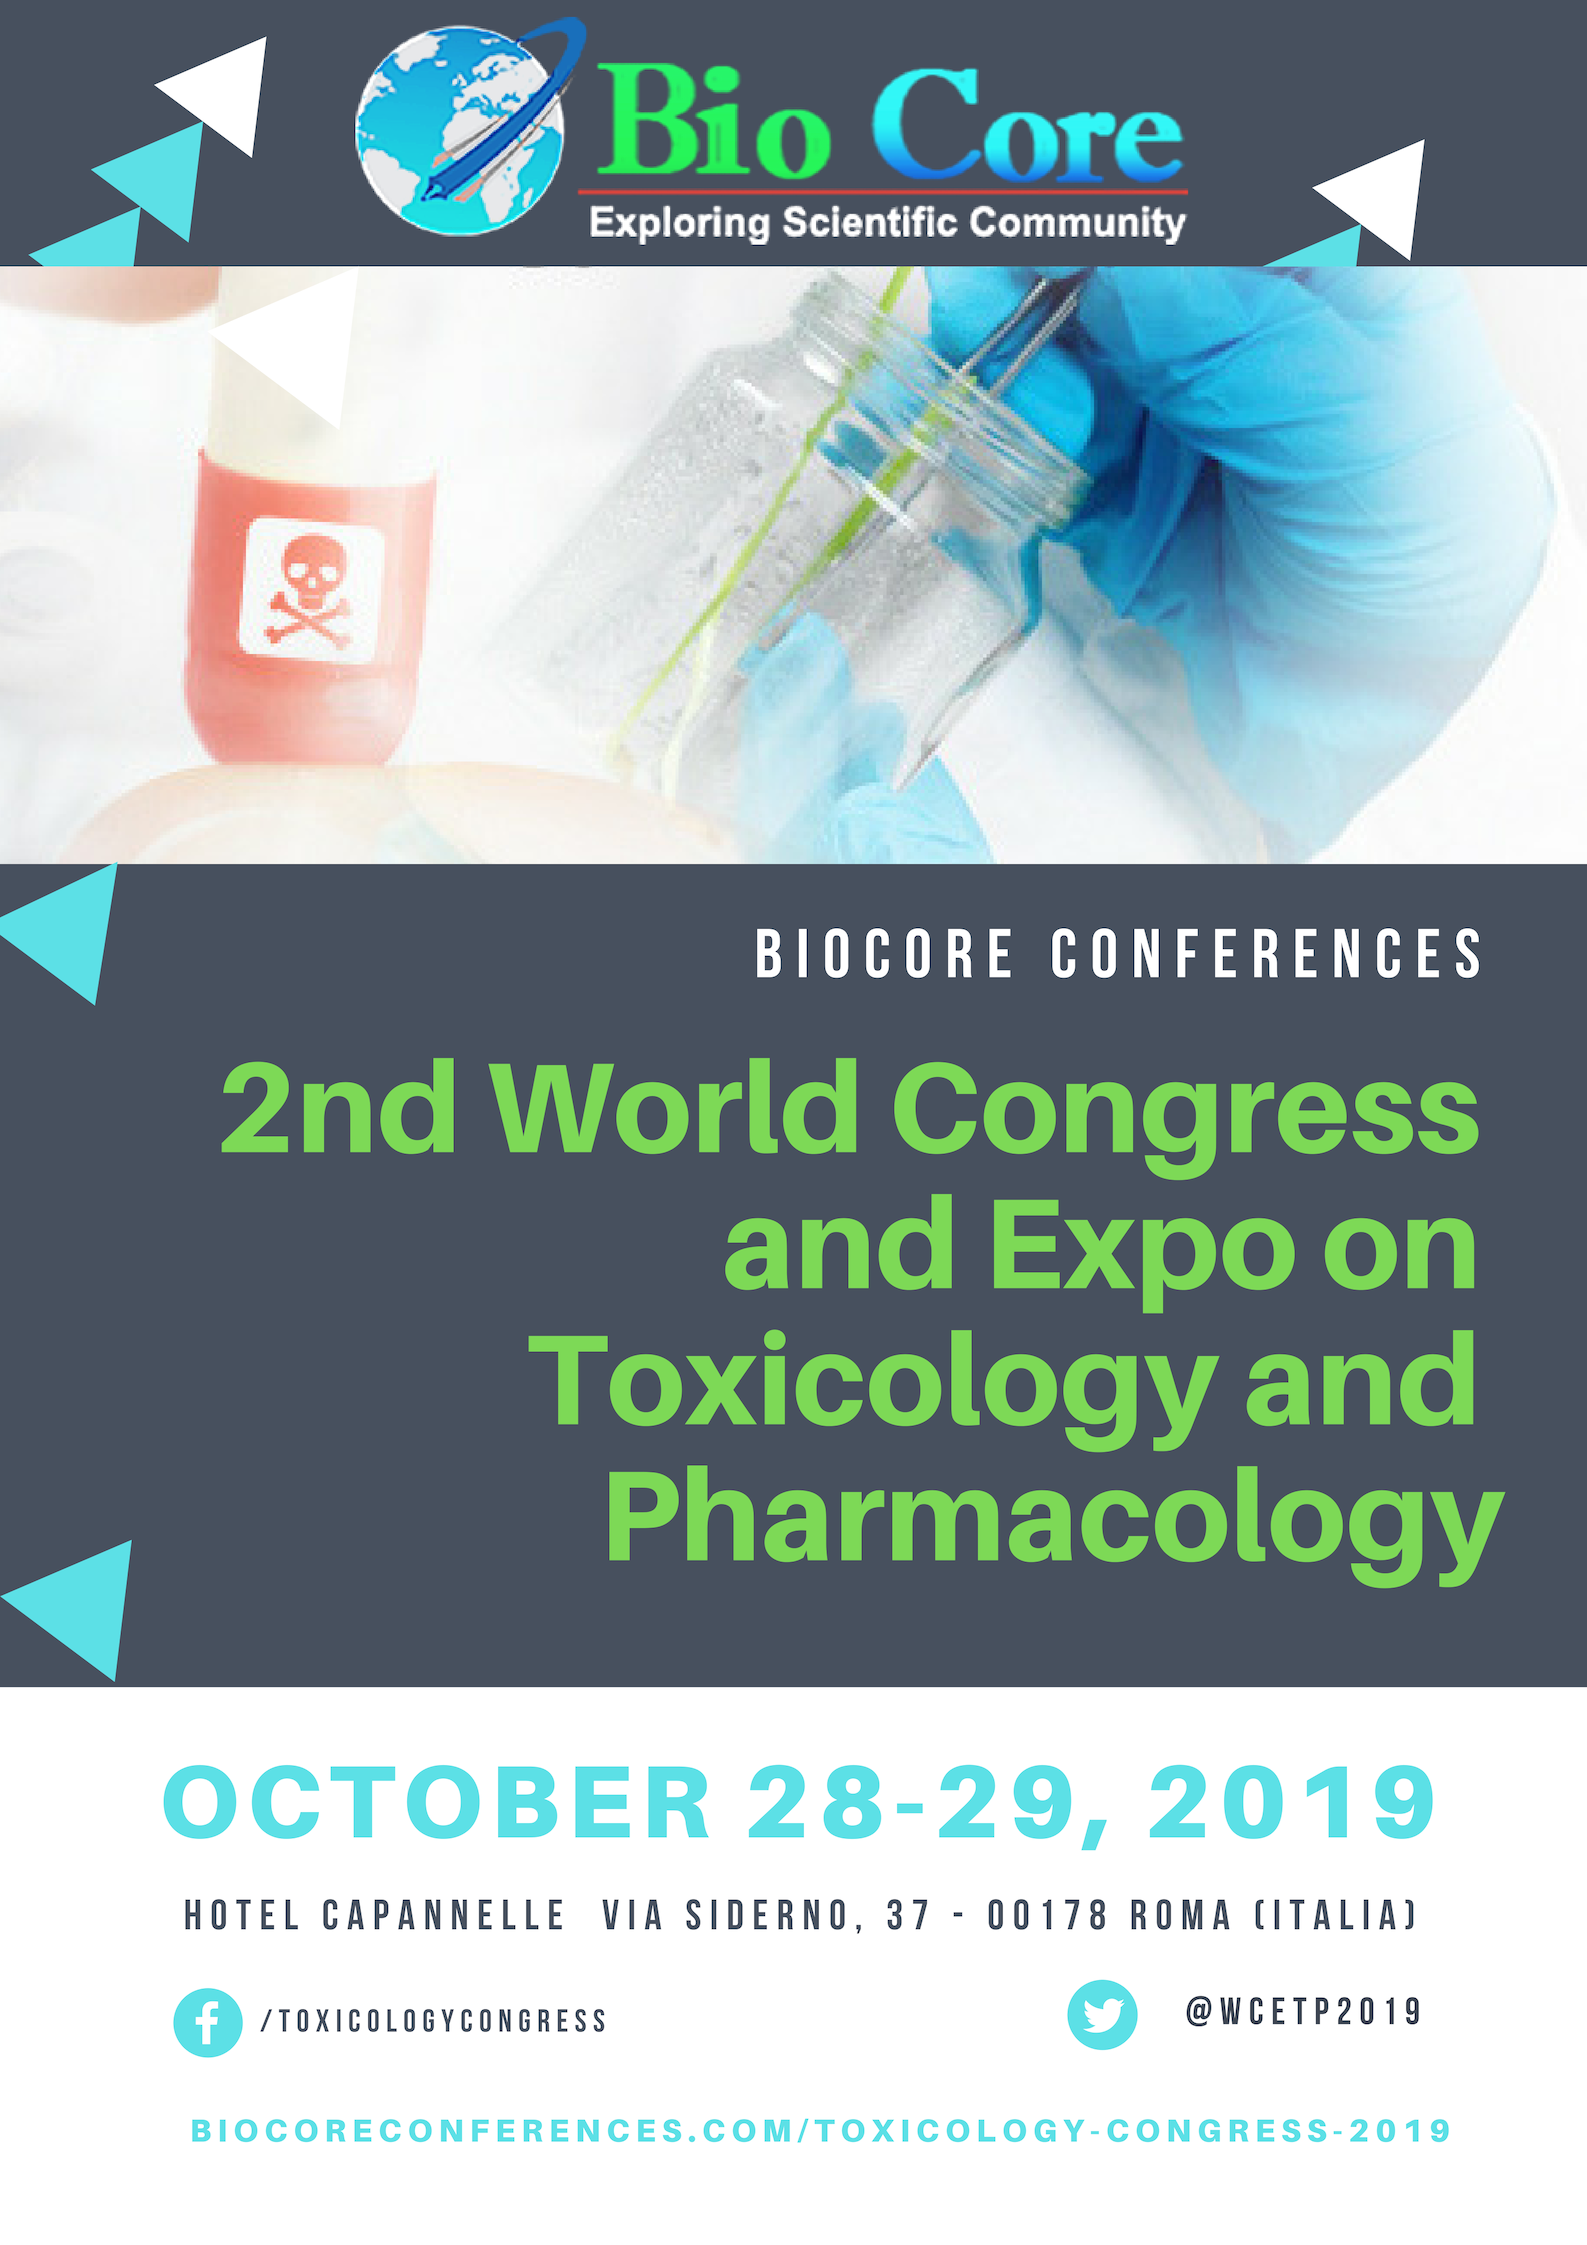 2nd World Congress and Expo on Toxicology and Pharmacology, Roma, Lazio, Italy